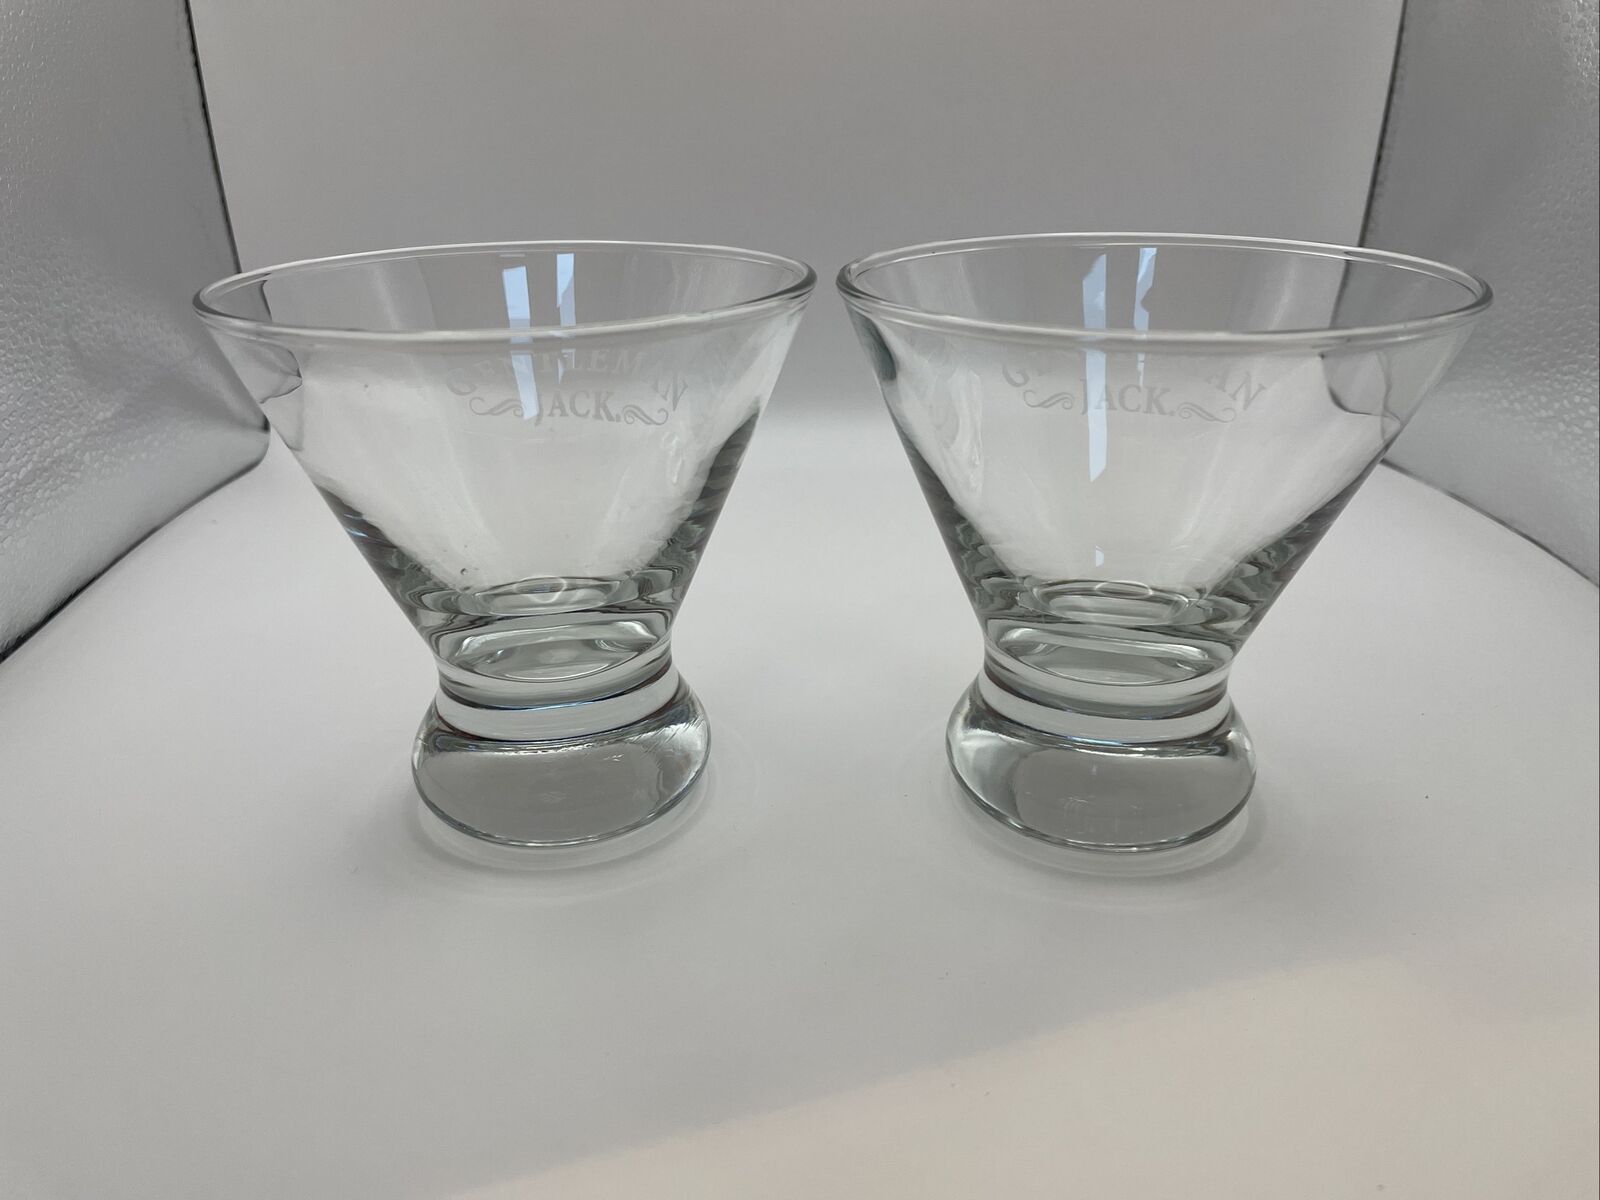 GENTLEMAN JACK Set Of 2 Glasses Etched Short Cosmo Old Fashioned Martini Daniels